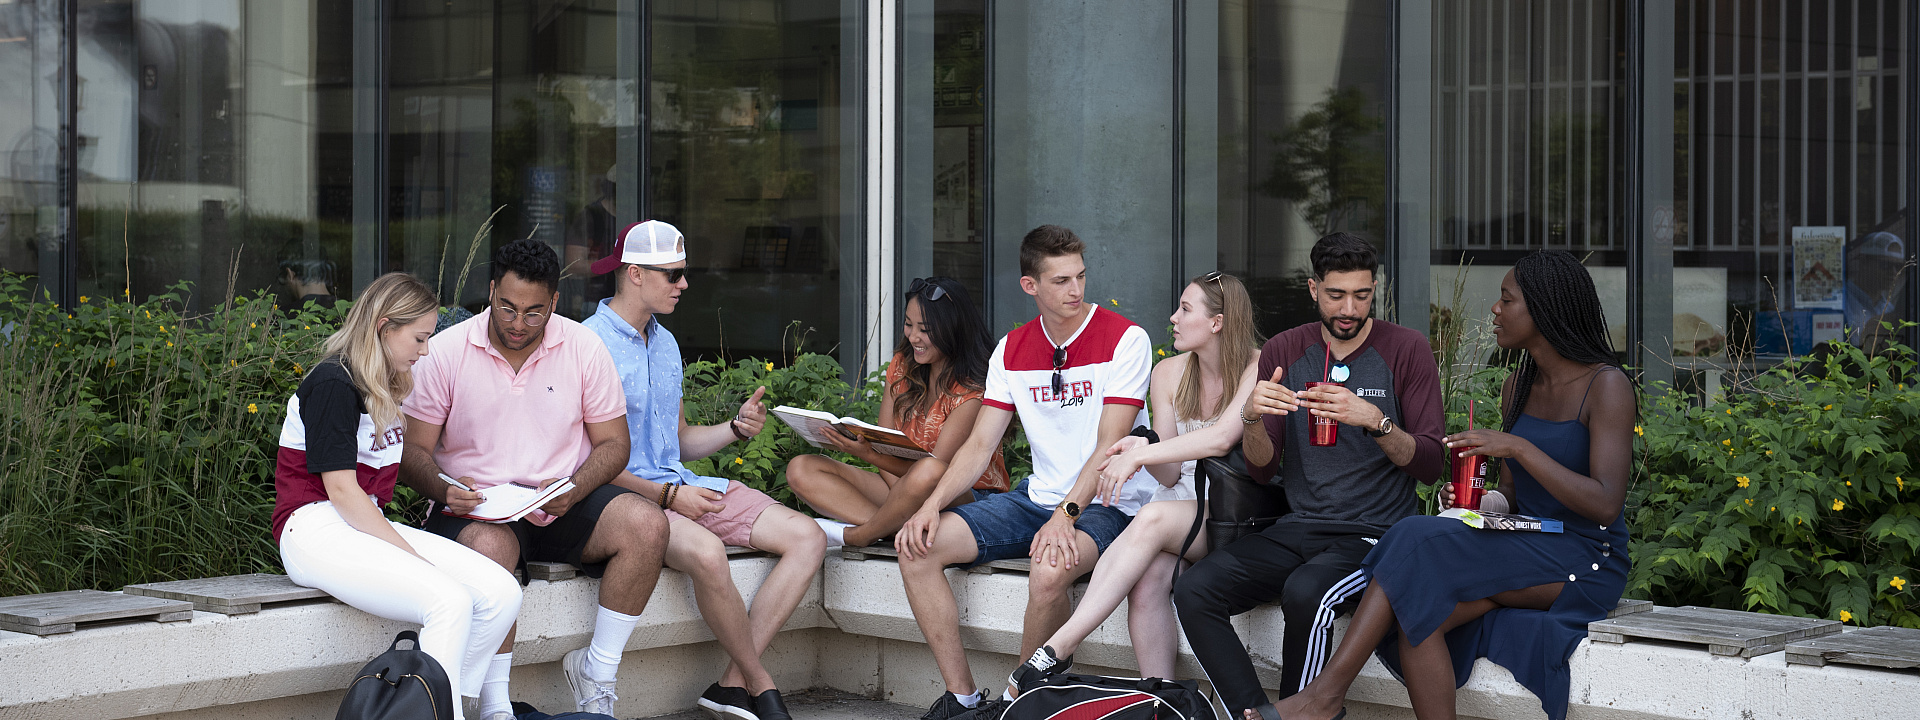 Telfer students sitting and studying in front of the large windows outside of the Faculty of Social Science (FSS)